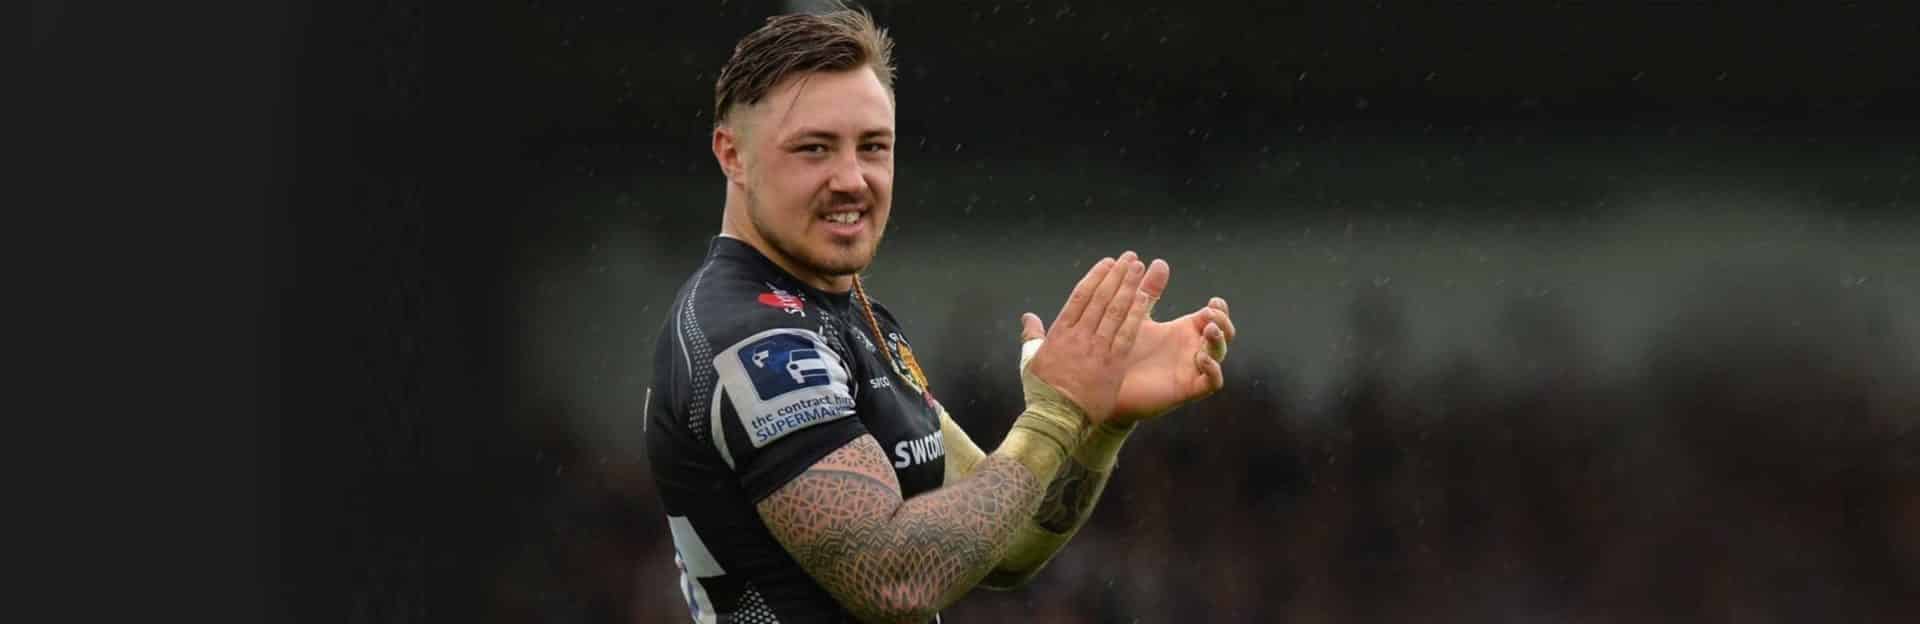 Jack Nowell tells us about his health routine.